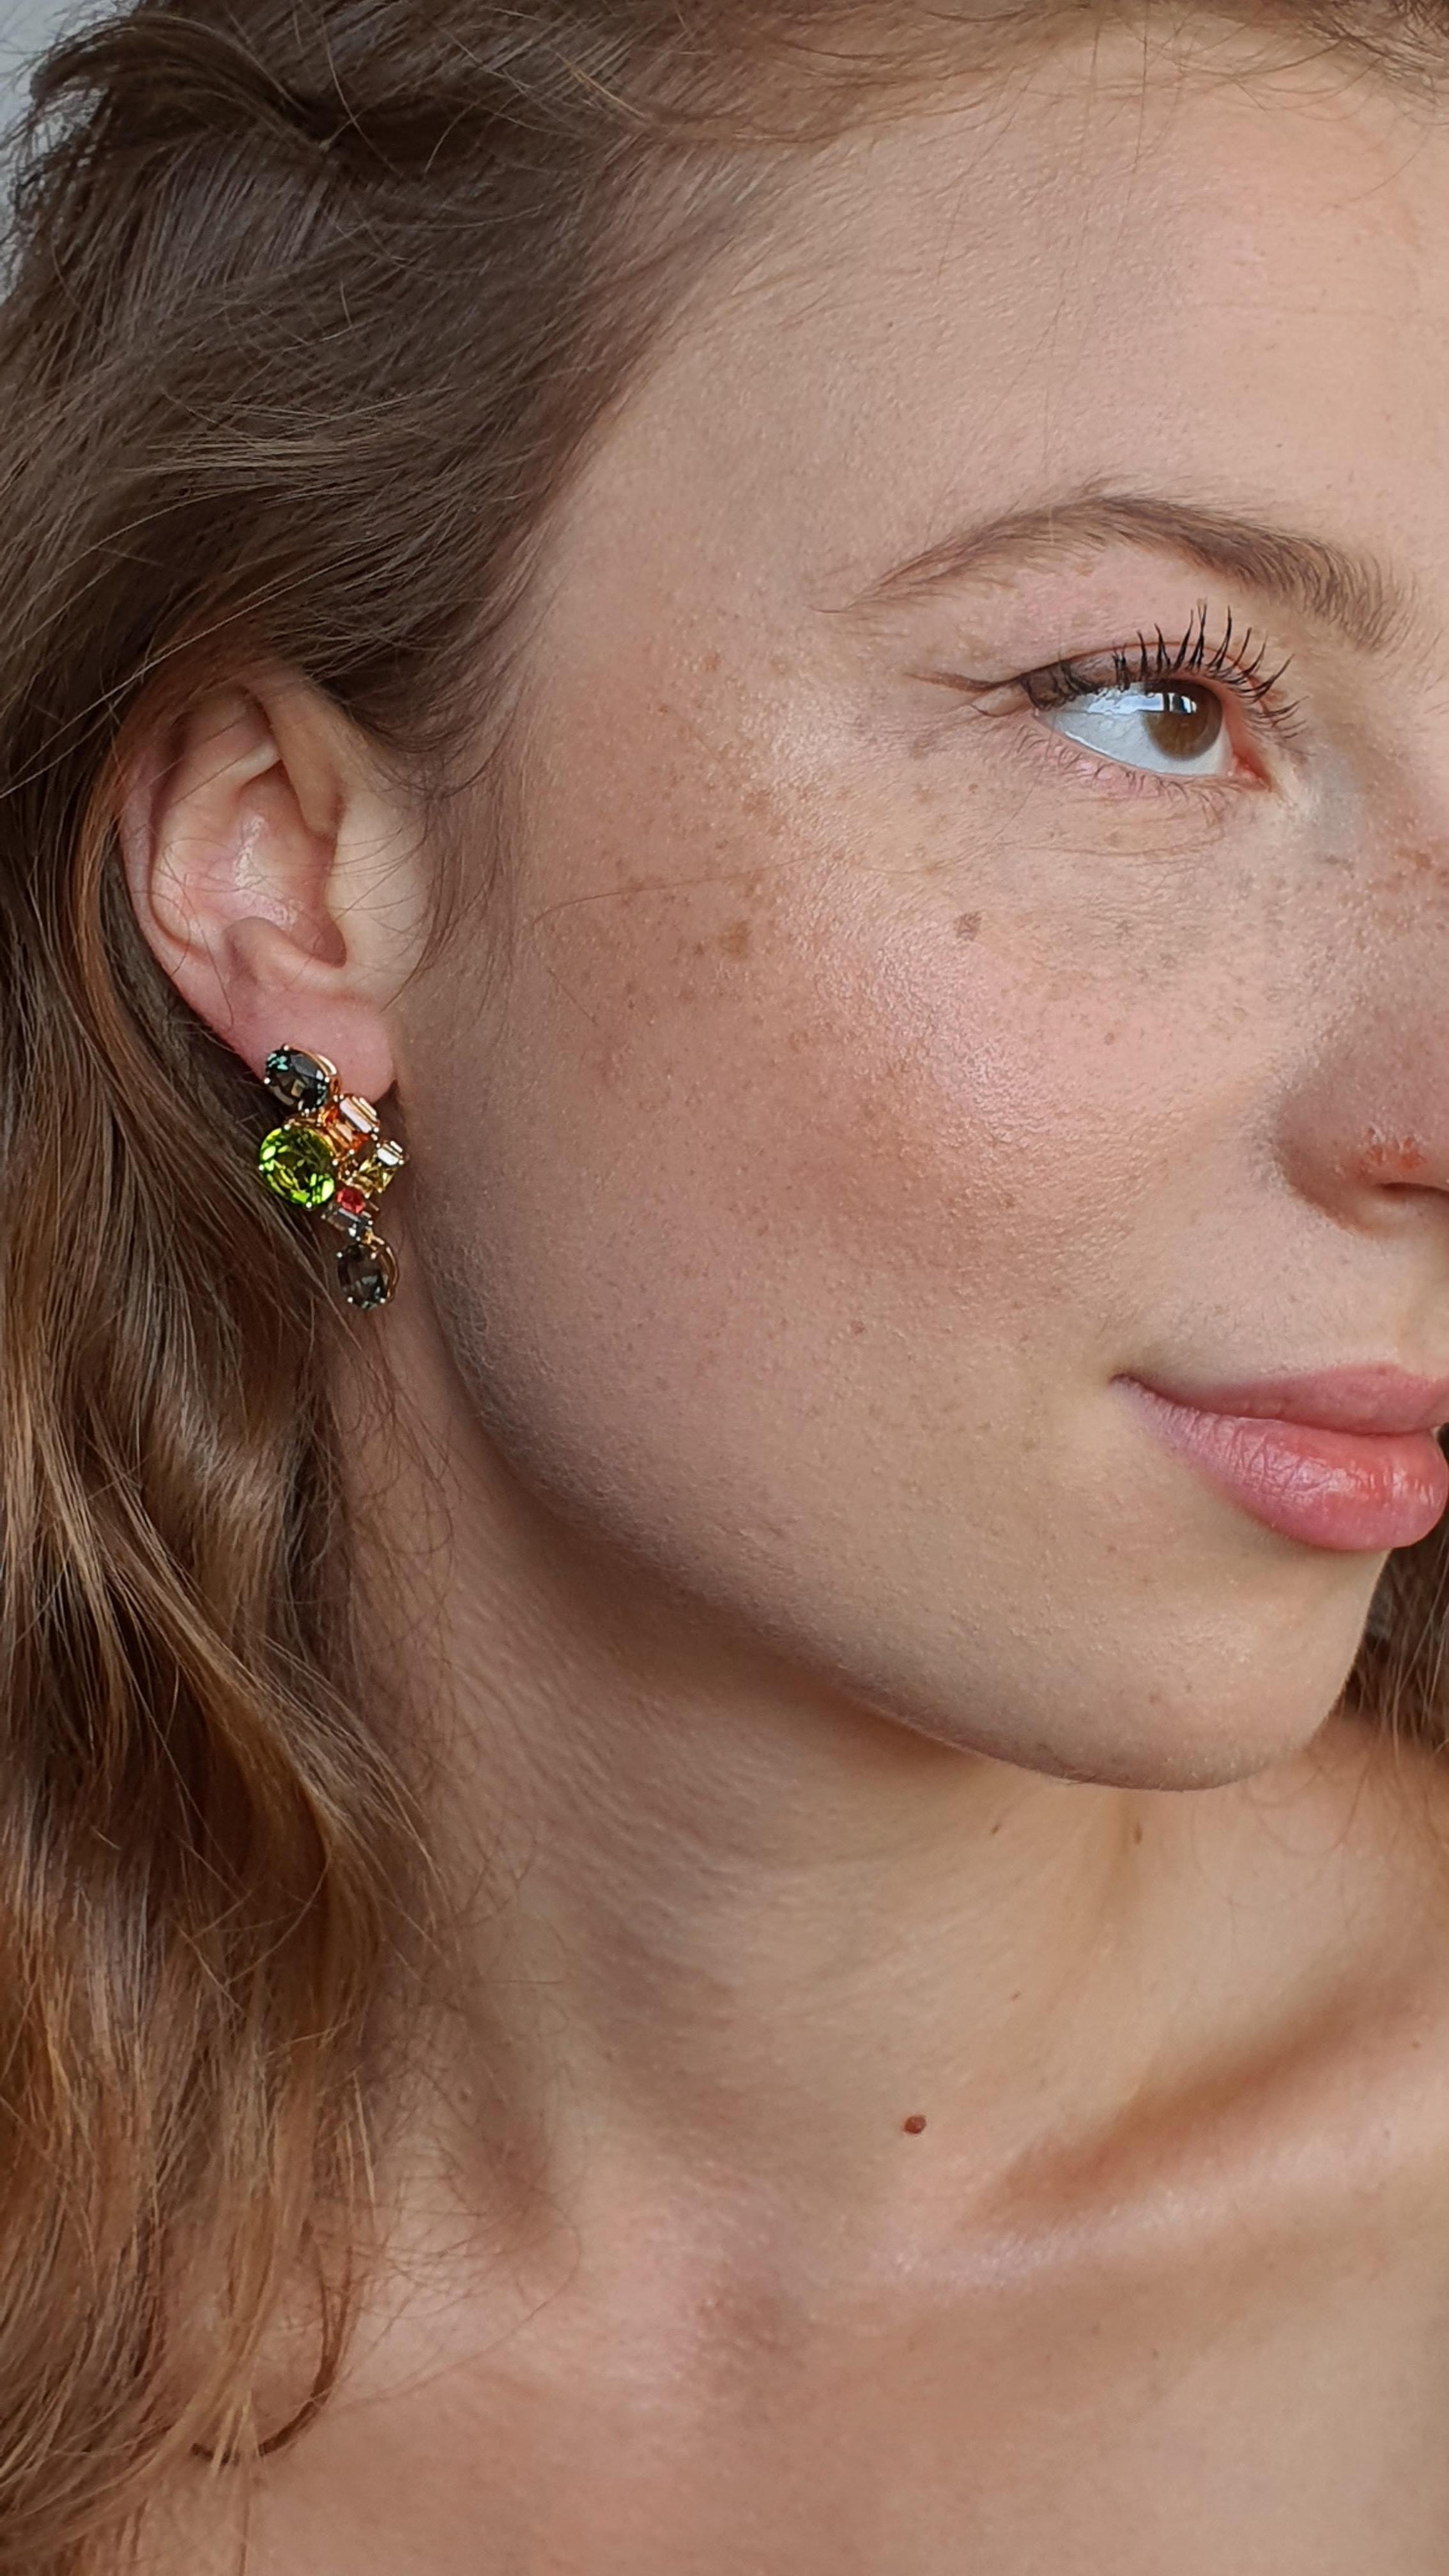 
These earrings feature an abstract multigem composition inspired by Chinese Emperor color palette. Chinese royal kimonos are decorated with bright florals and exotic birds which fascinated ALPENGEM designers to create these earrings. Orange,